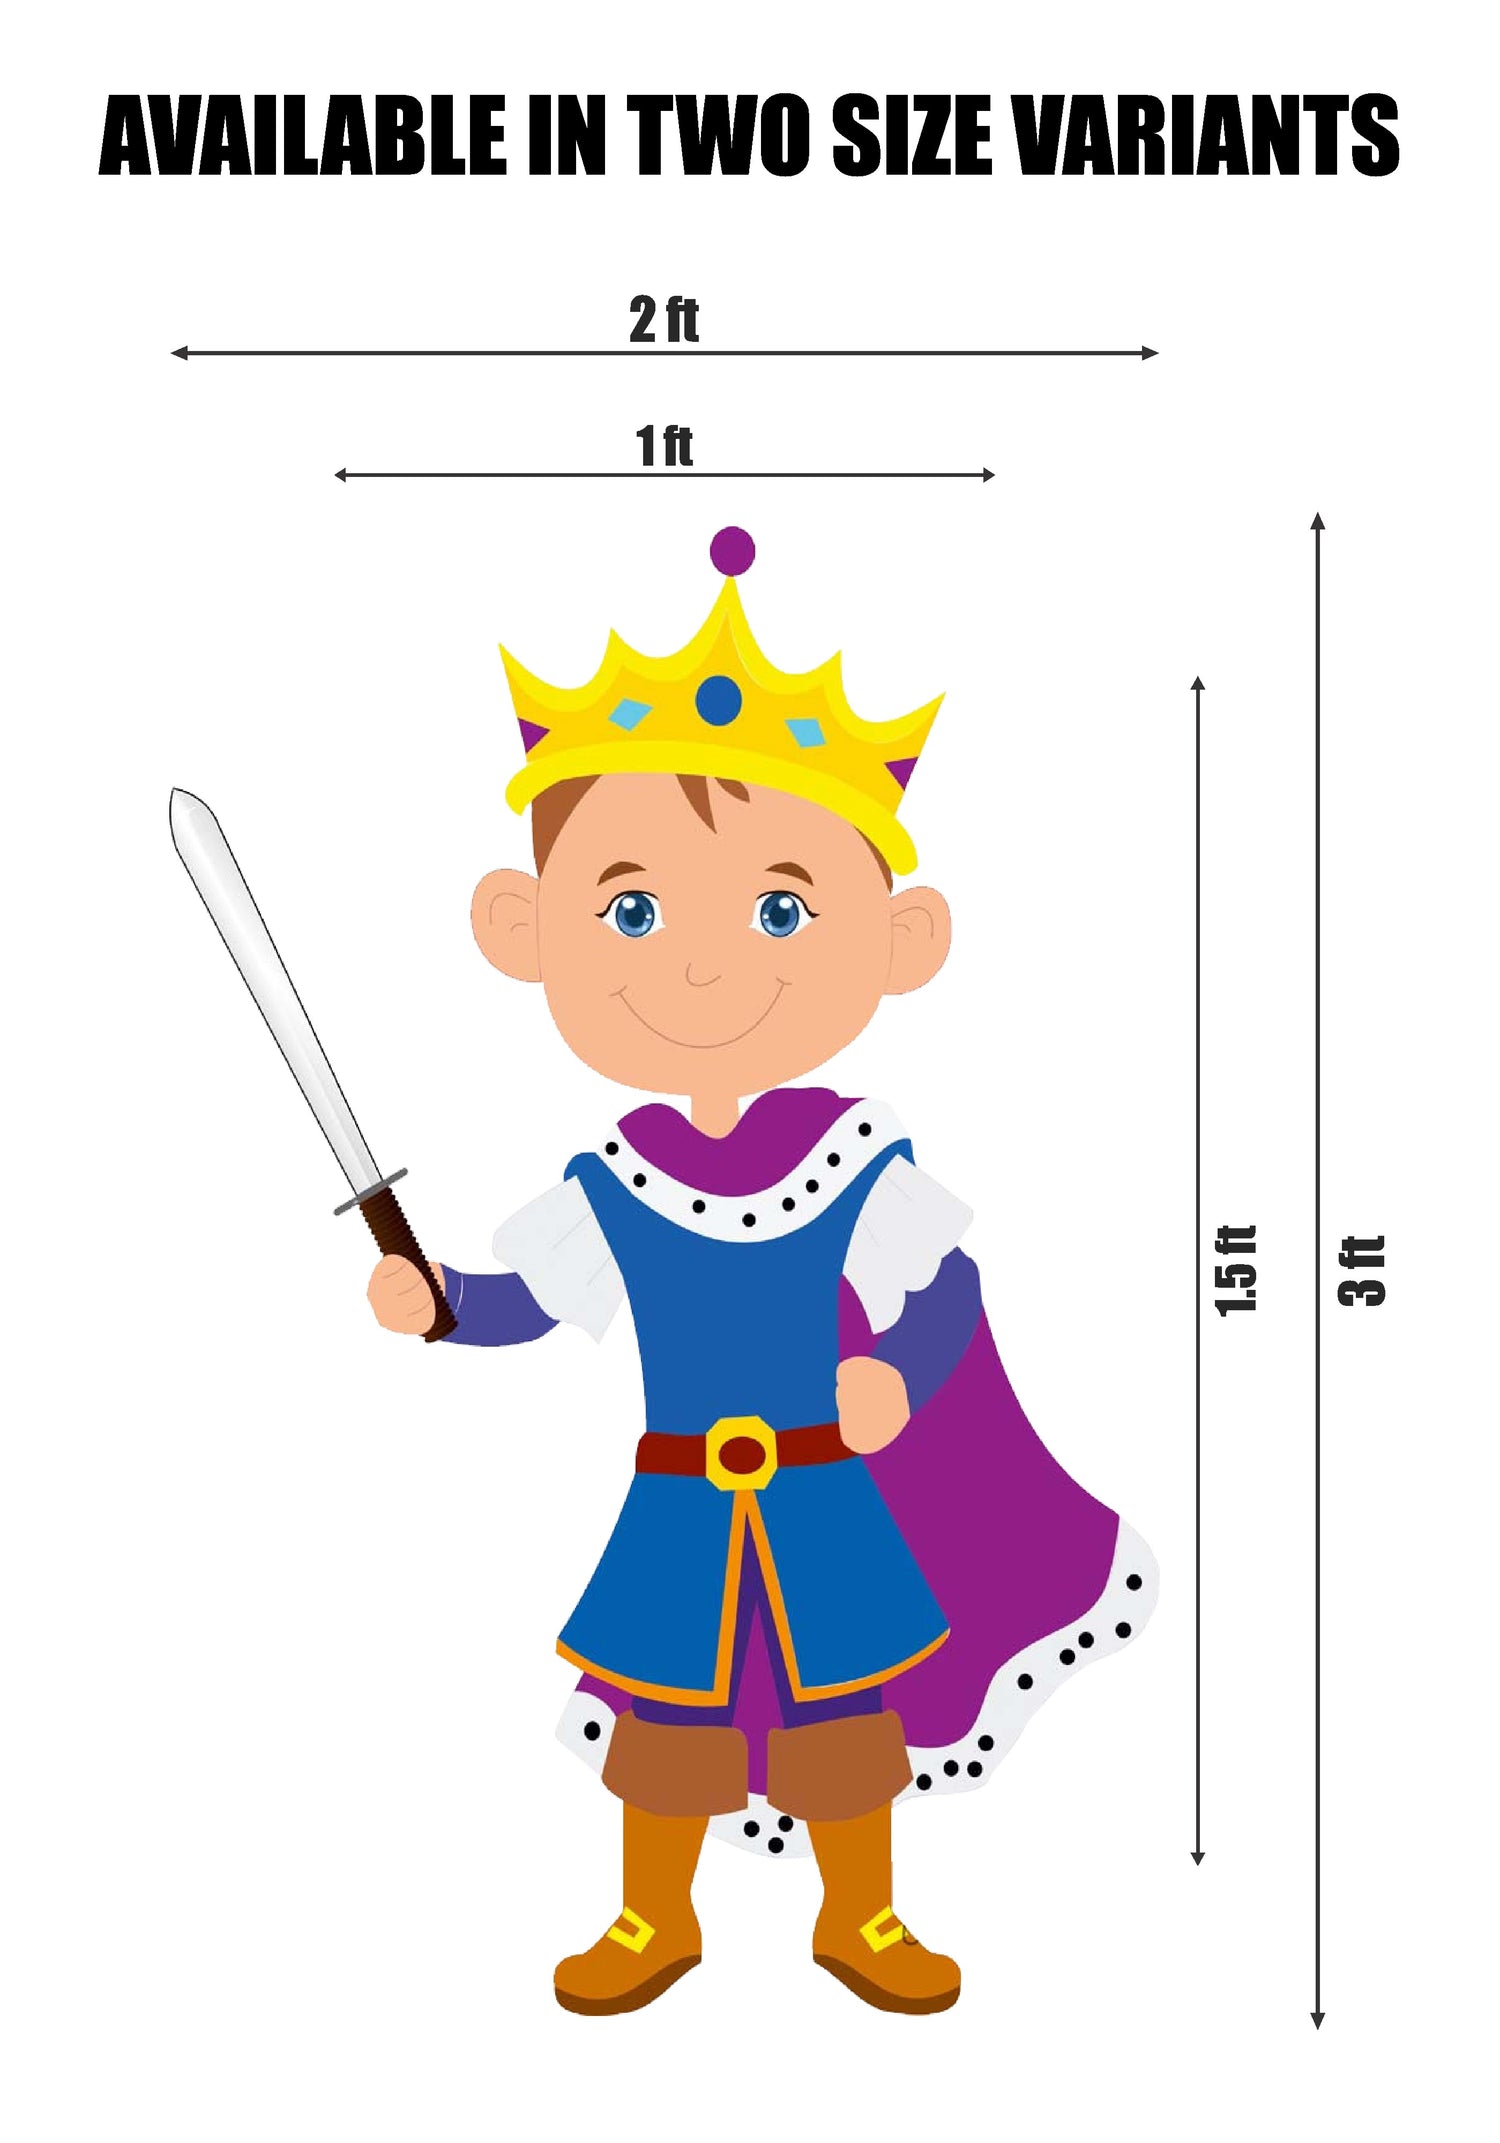 Prince Theme with Sword in Hand Cutout